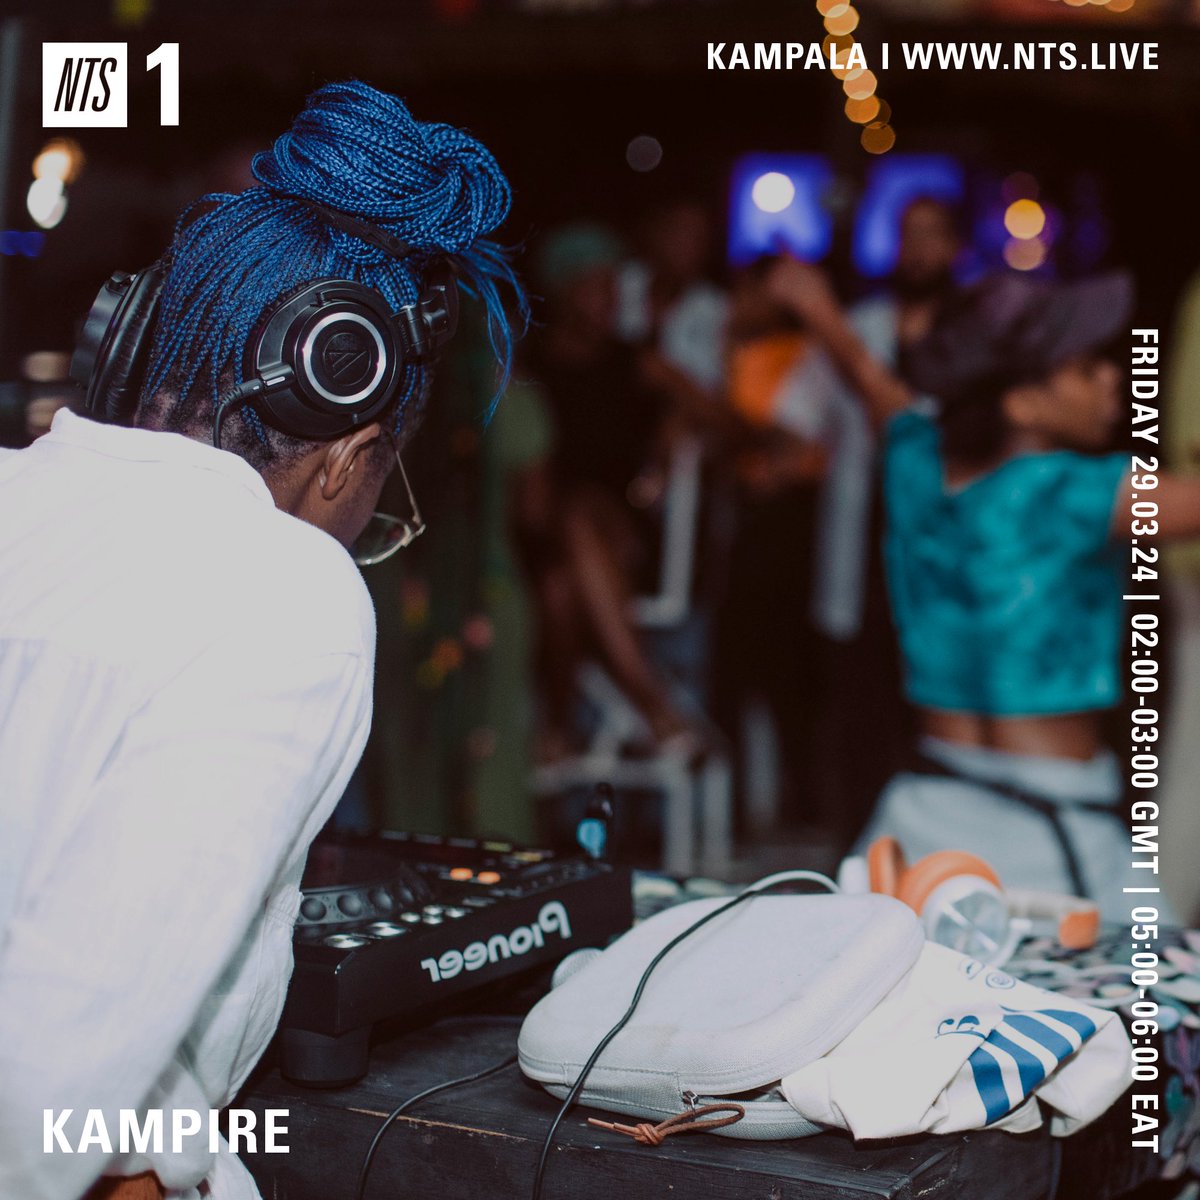 .@Vugafrica playing 100% downtempo and ambient music produced by East African artists - 2am GMT nts.live/shows/kampire/…